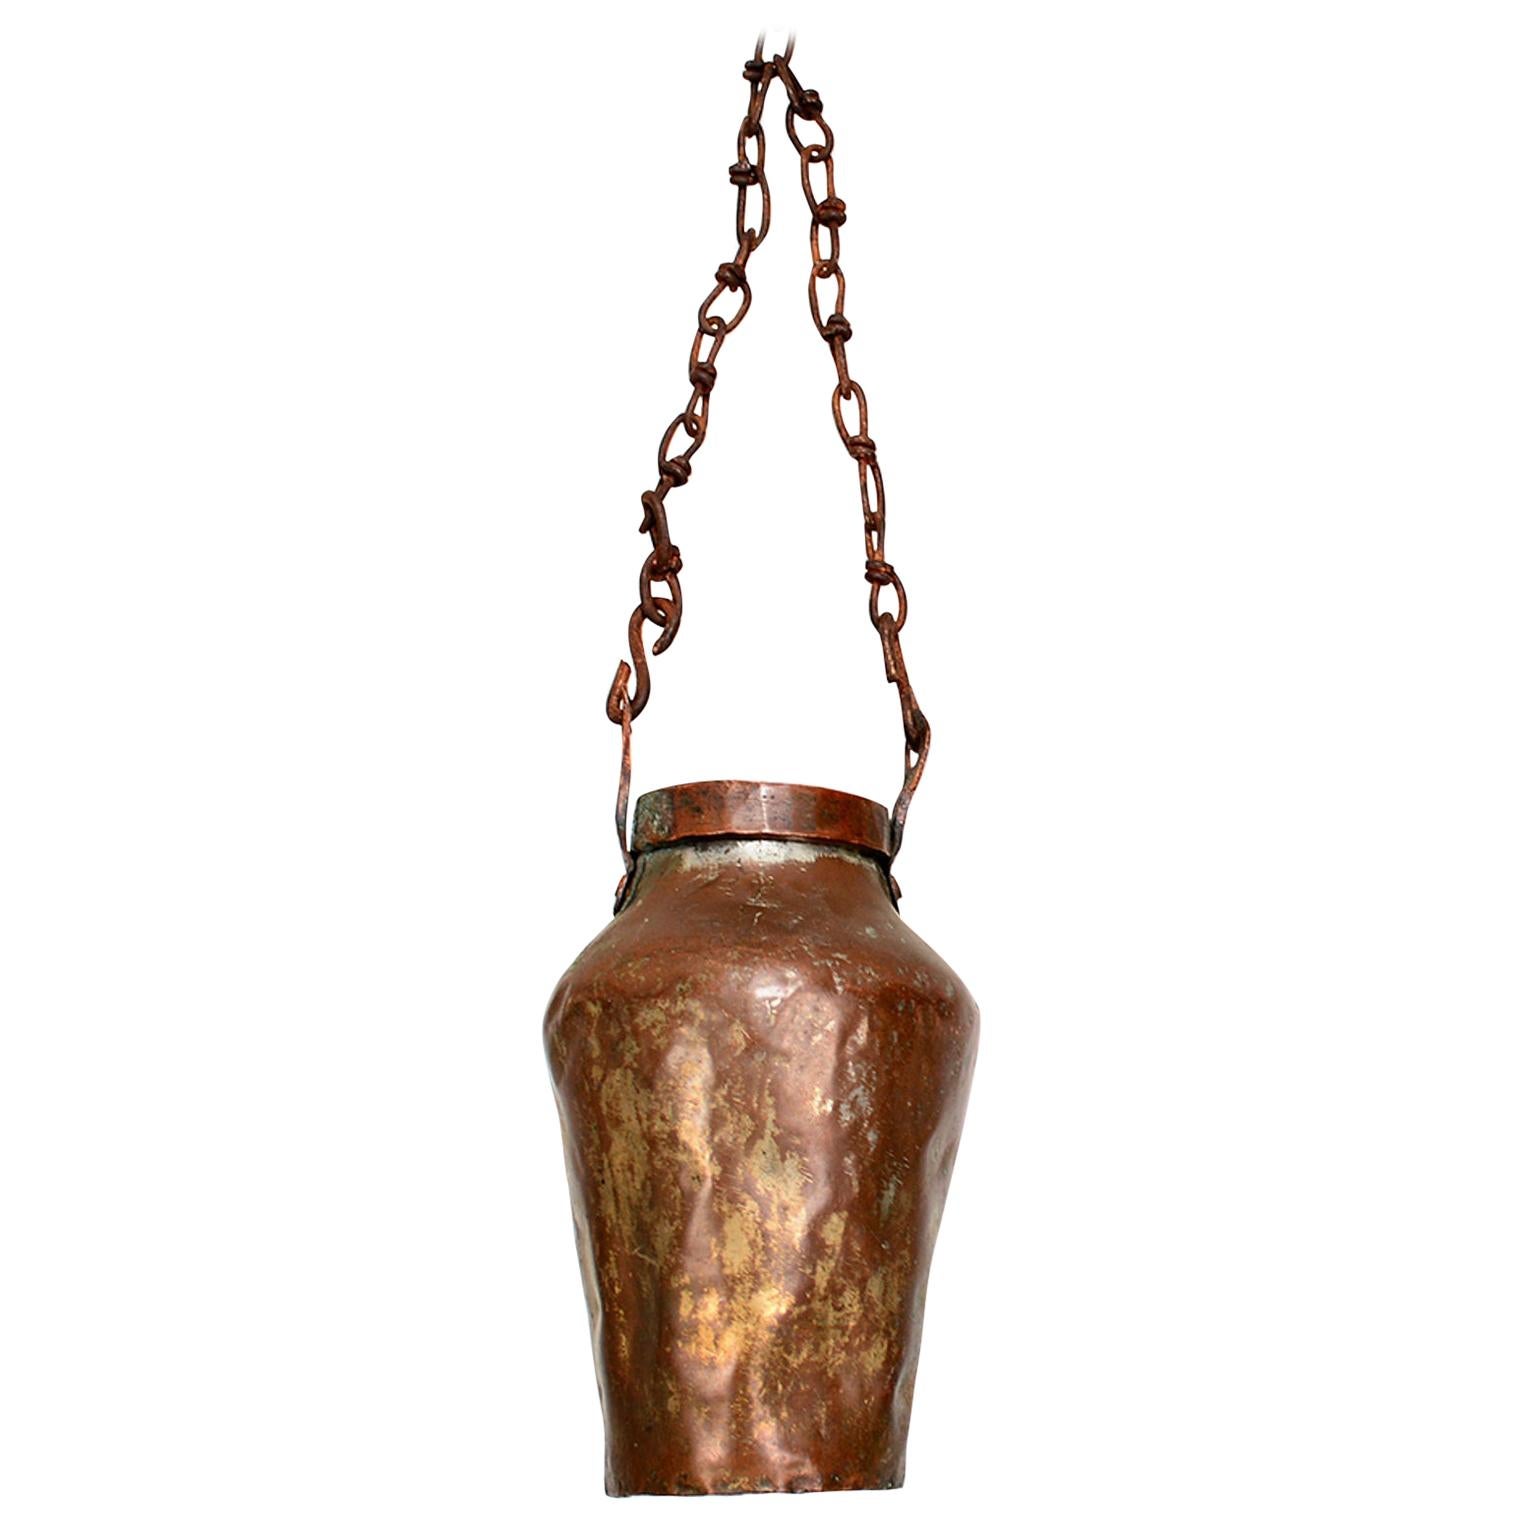 Antique French Hanging Pot Hammered Copper & Brass Thick Chain 1800s